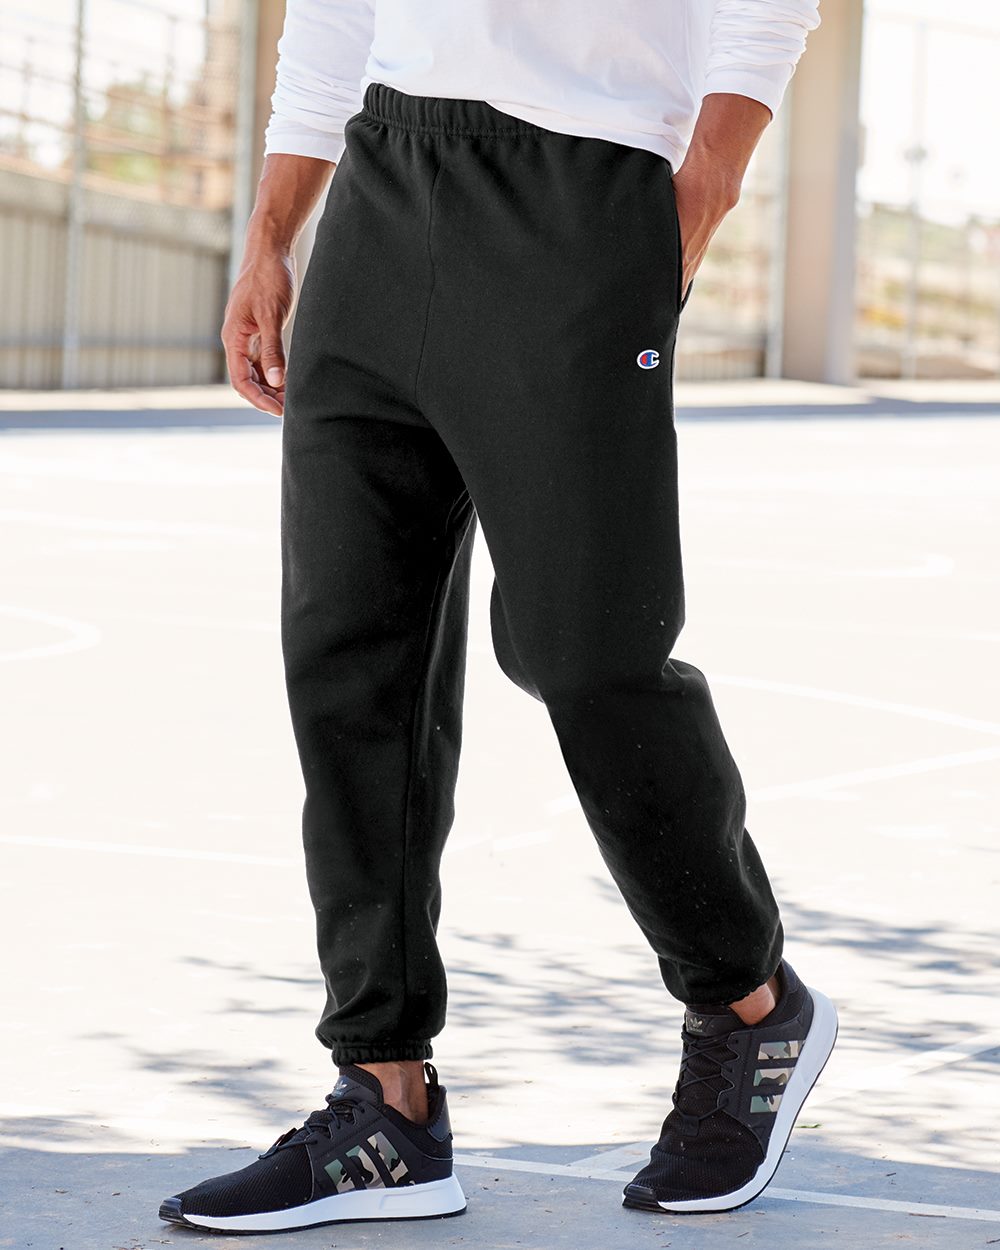 Champion Reverse Weave Sweatpants with Pockets